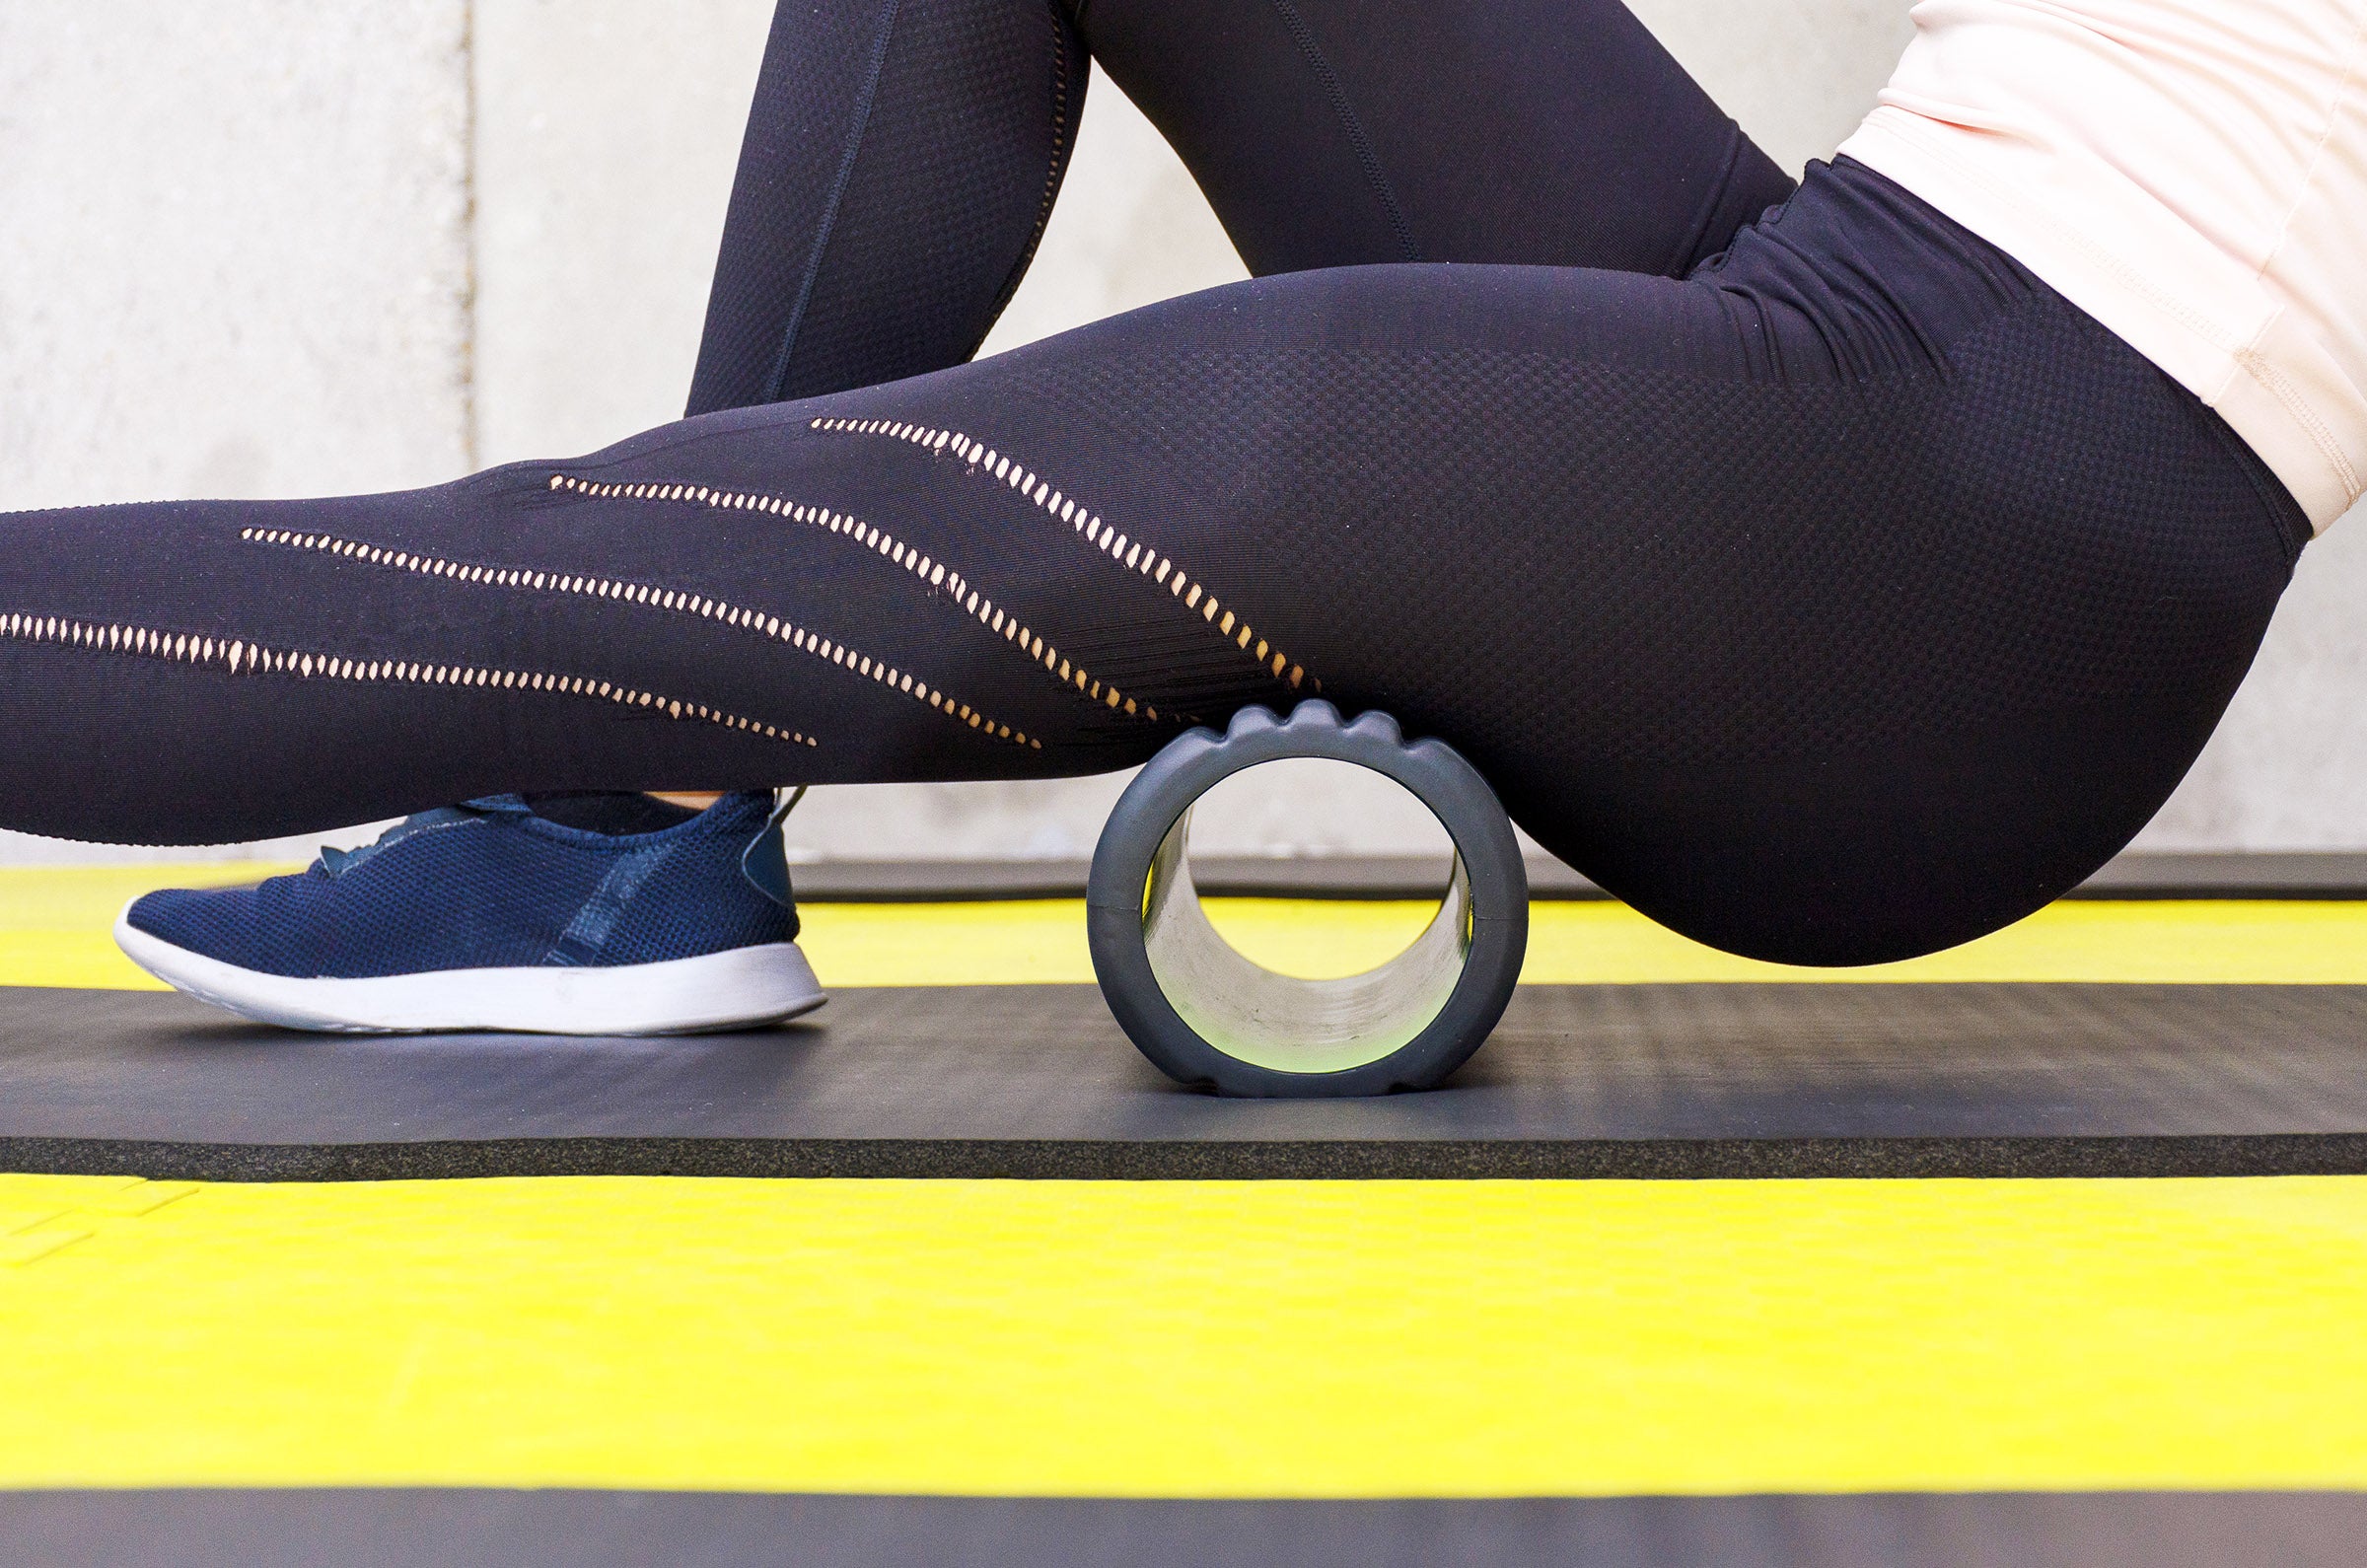 How To Use A Foam Roller Before And After A Workout